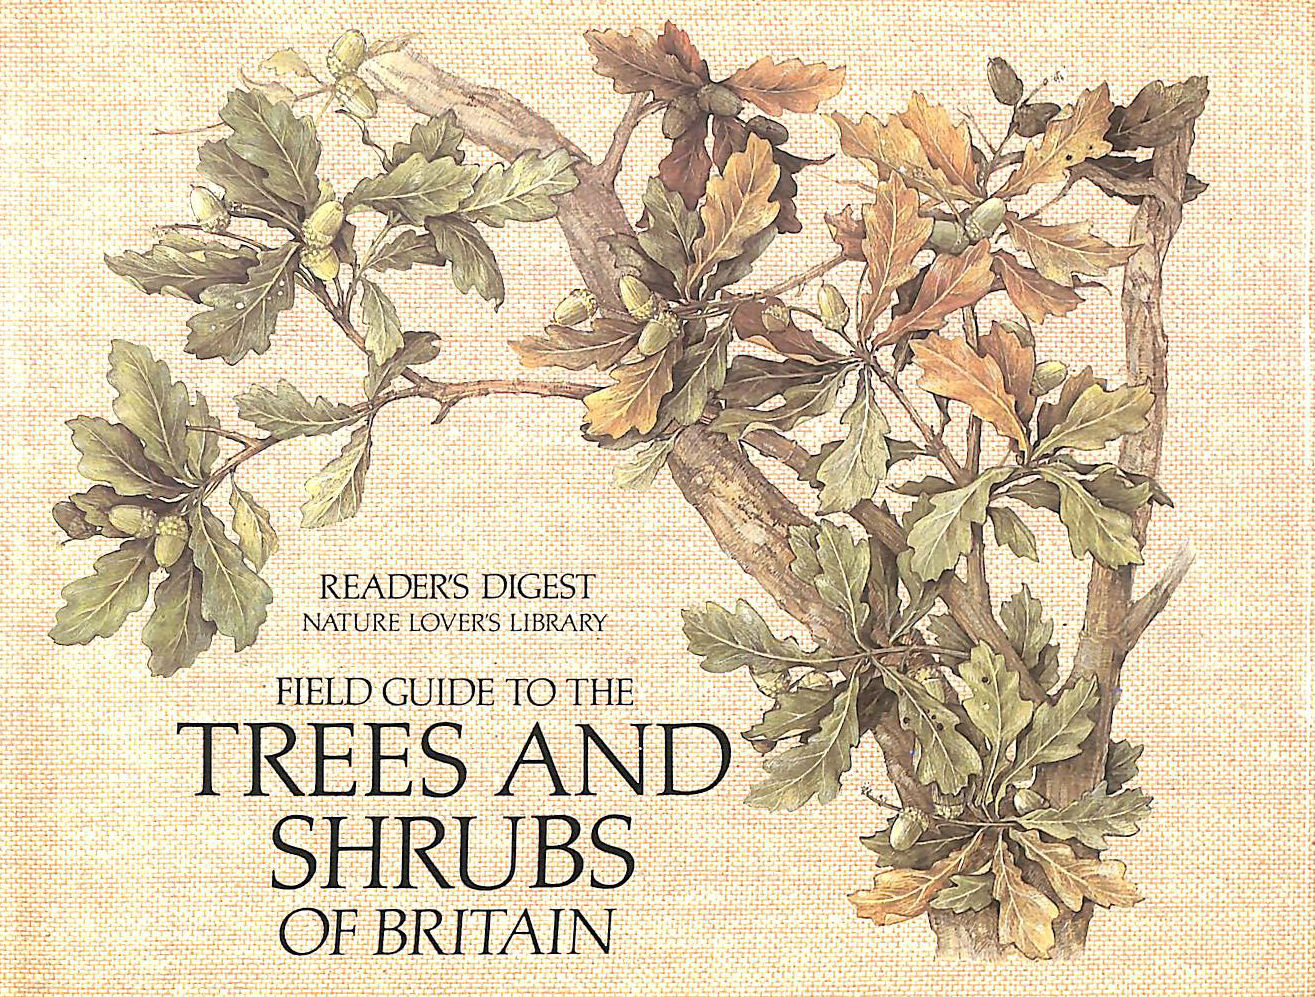 READERS DIGEST - FIELD GUIDE TO THE TREES AND SHRUBS OF BRITAIN